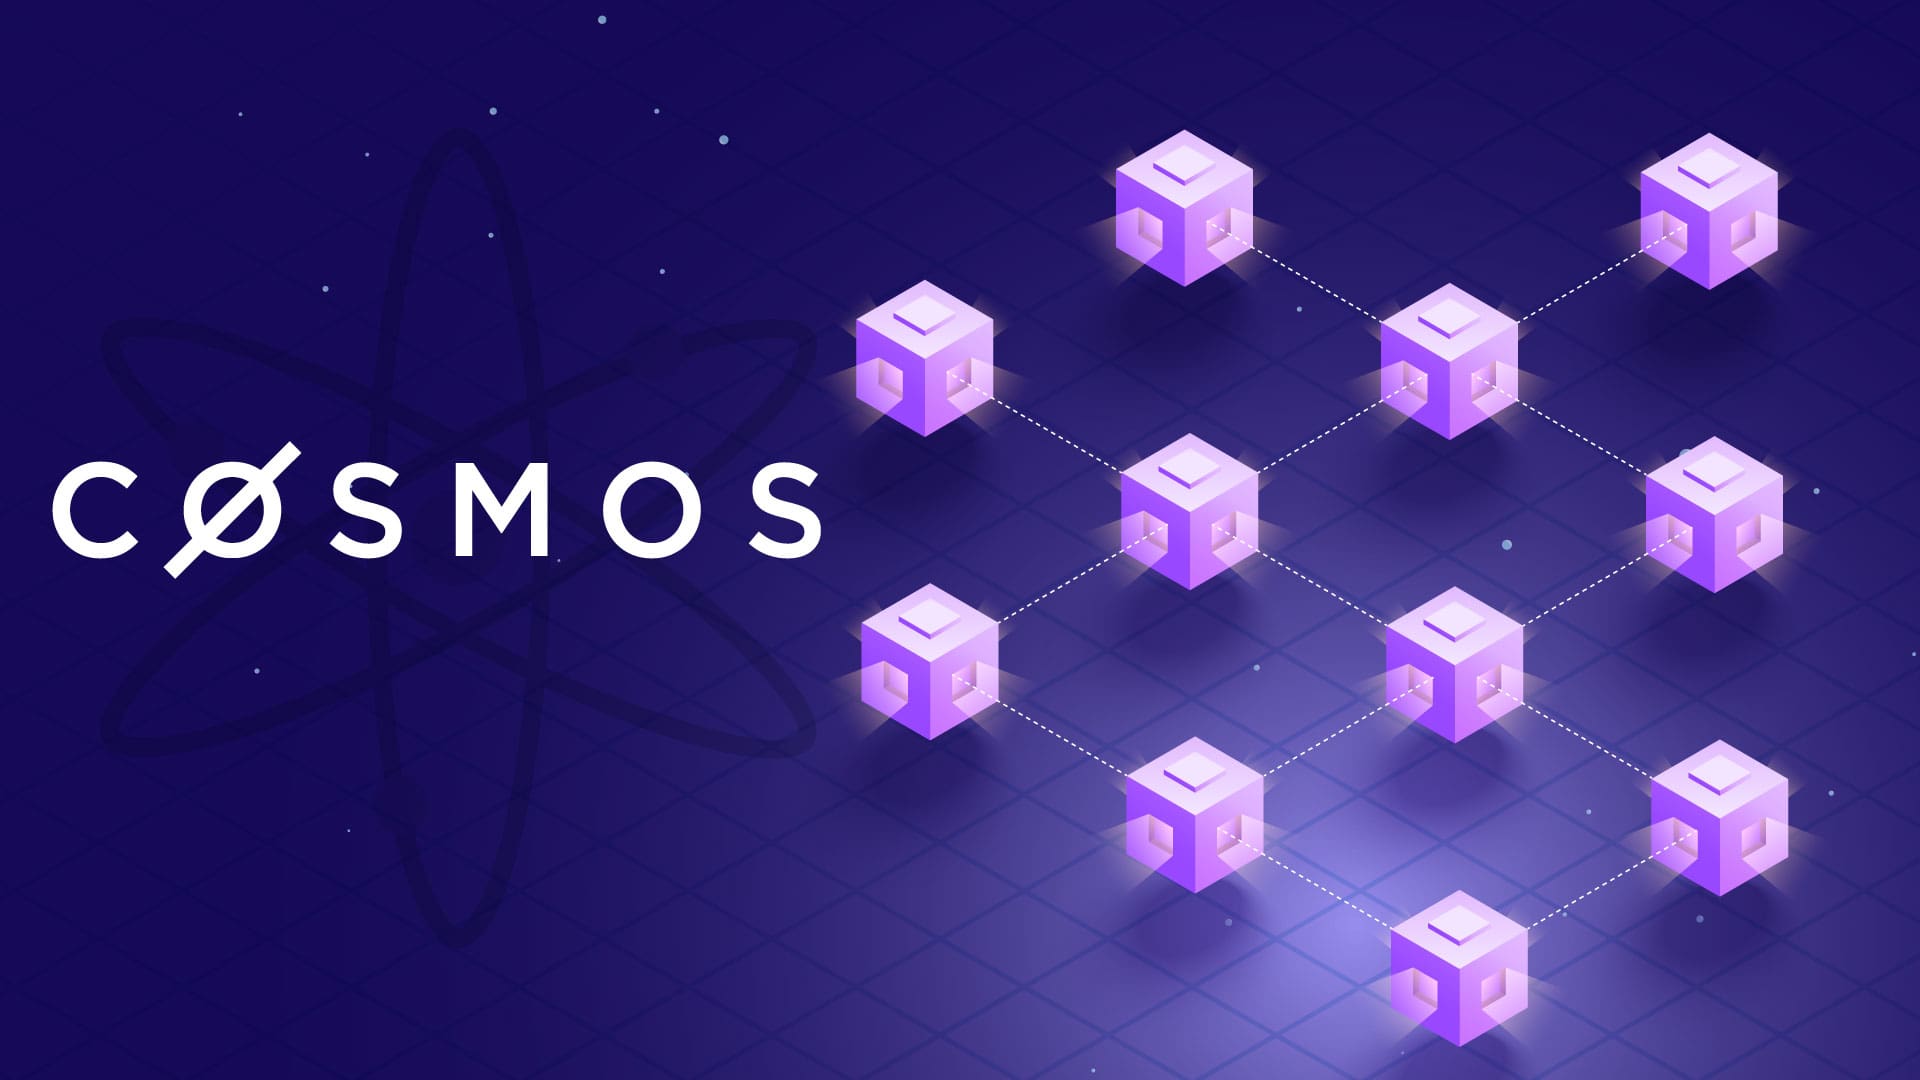 Cosmos Price Forecast for 2021-2022